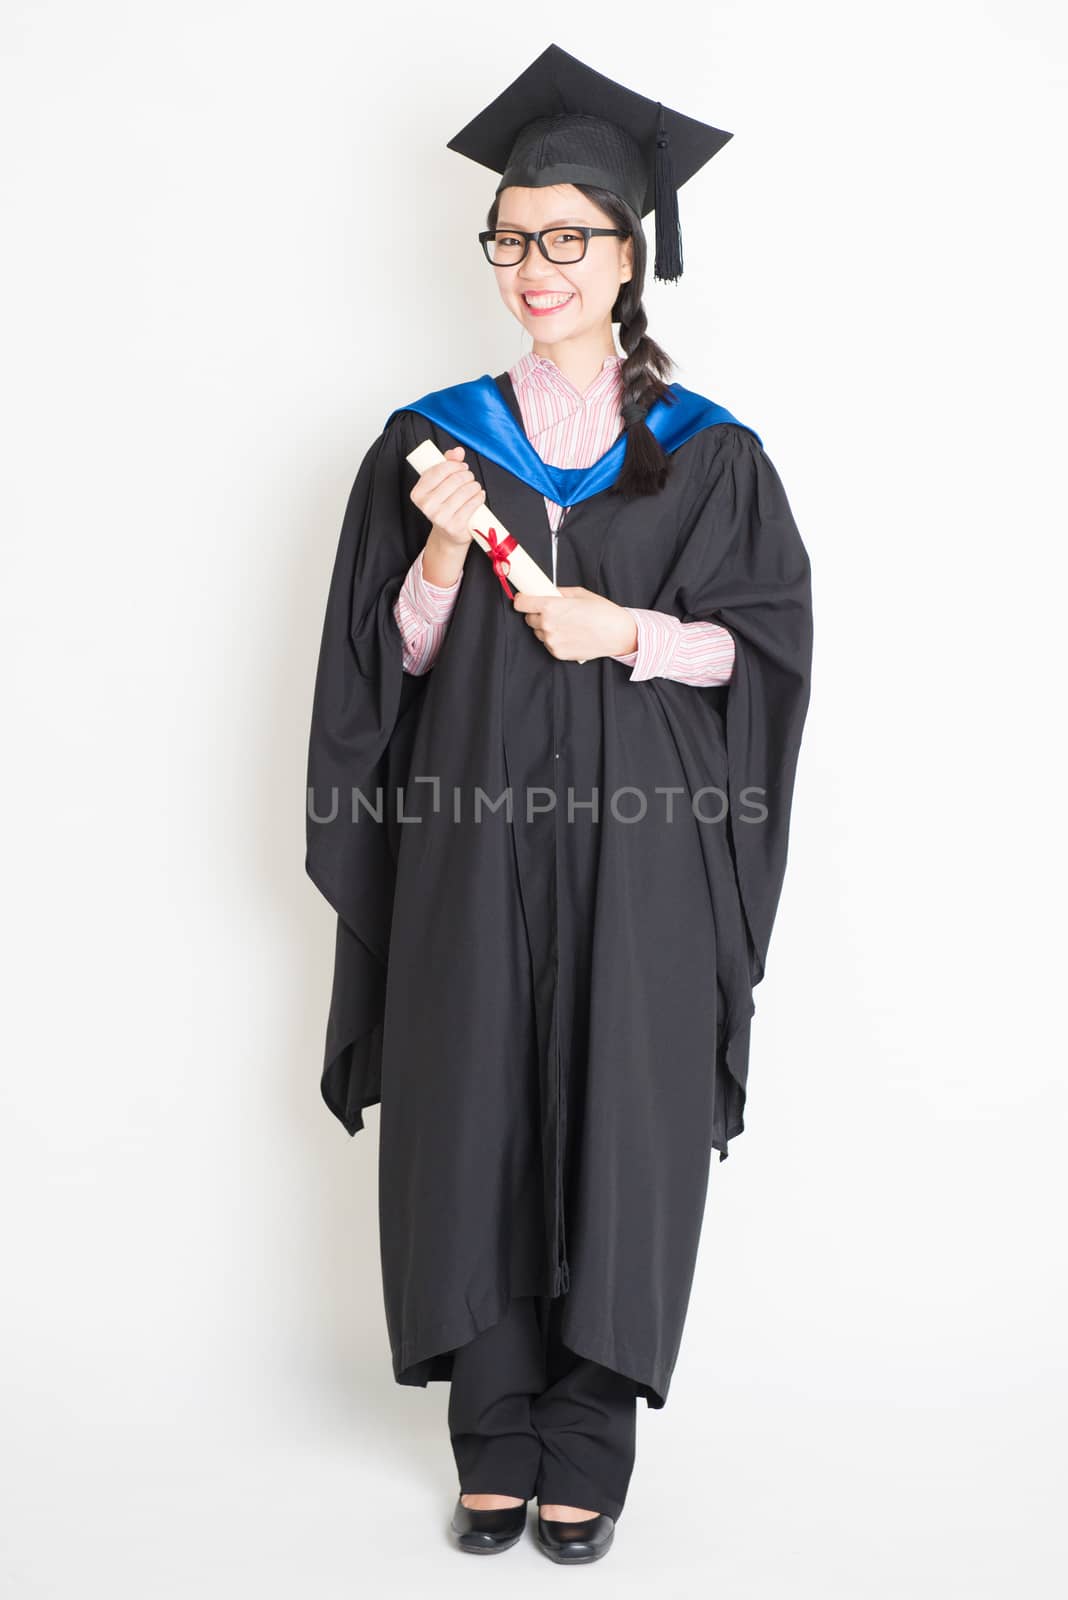 University student in graduation gown and cap holding diploma certificate. Full body portrait of east  Asian female model standing on plain background.